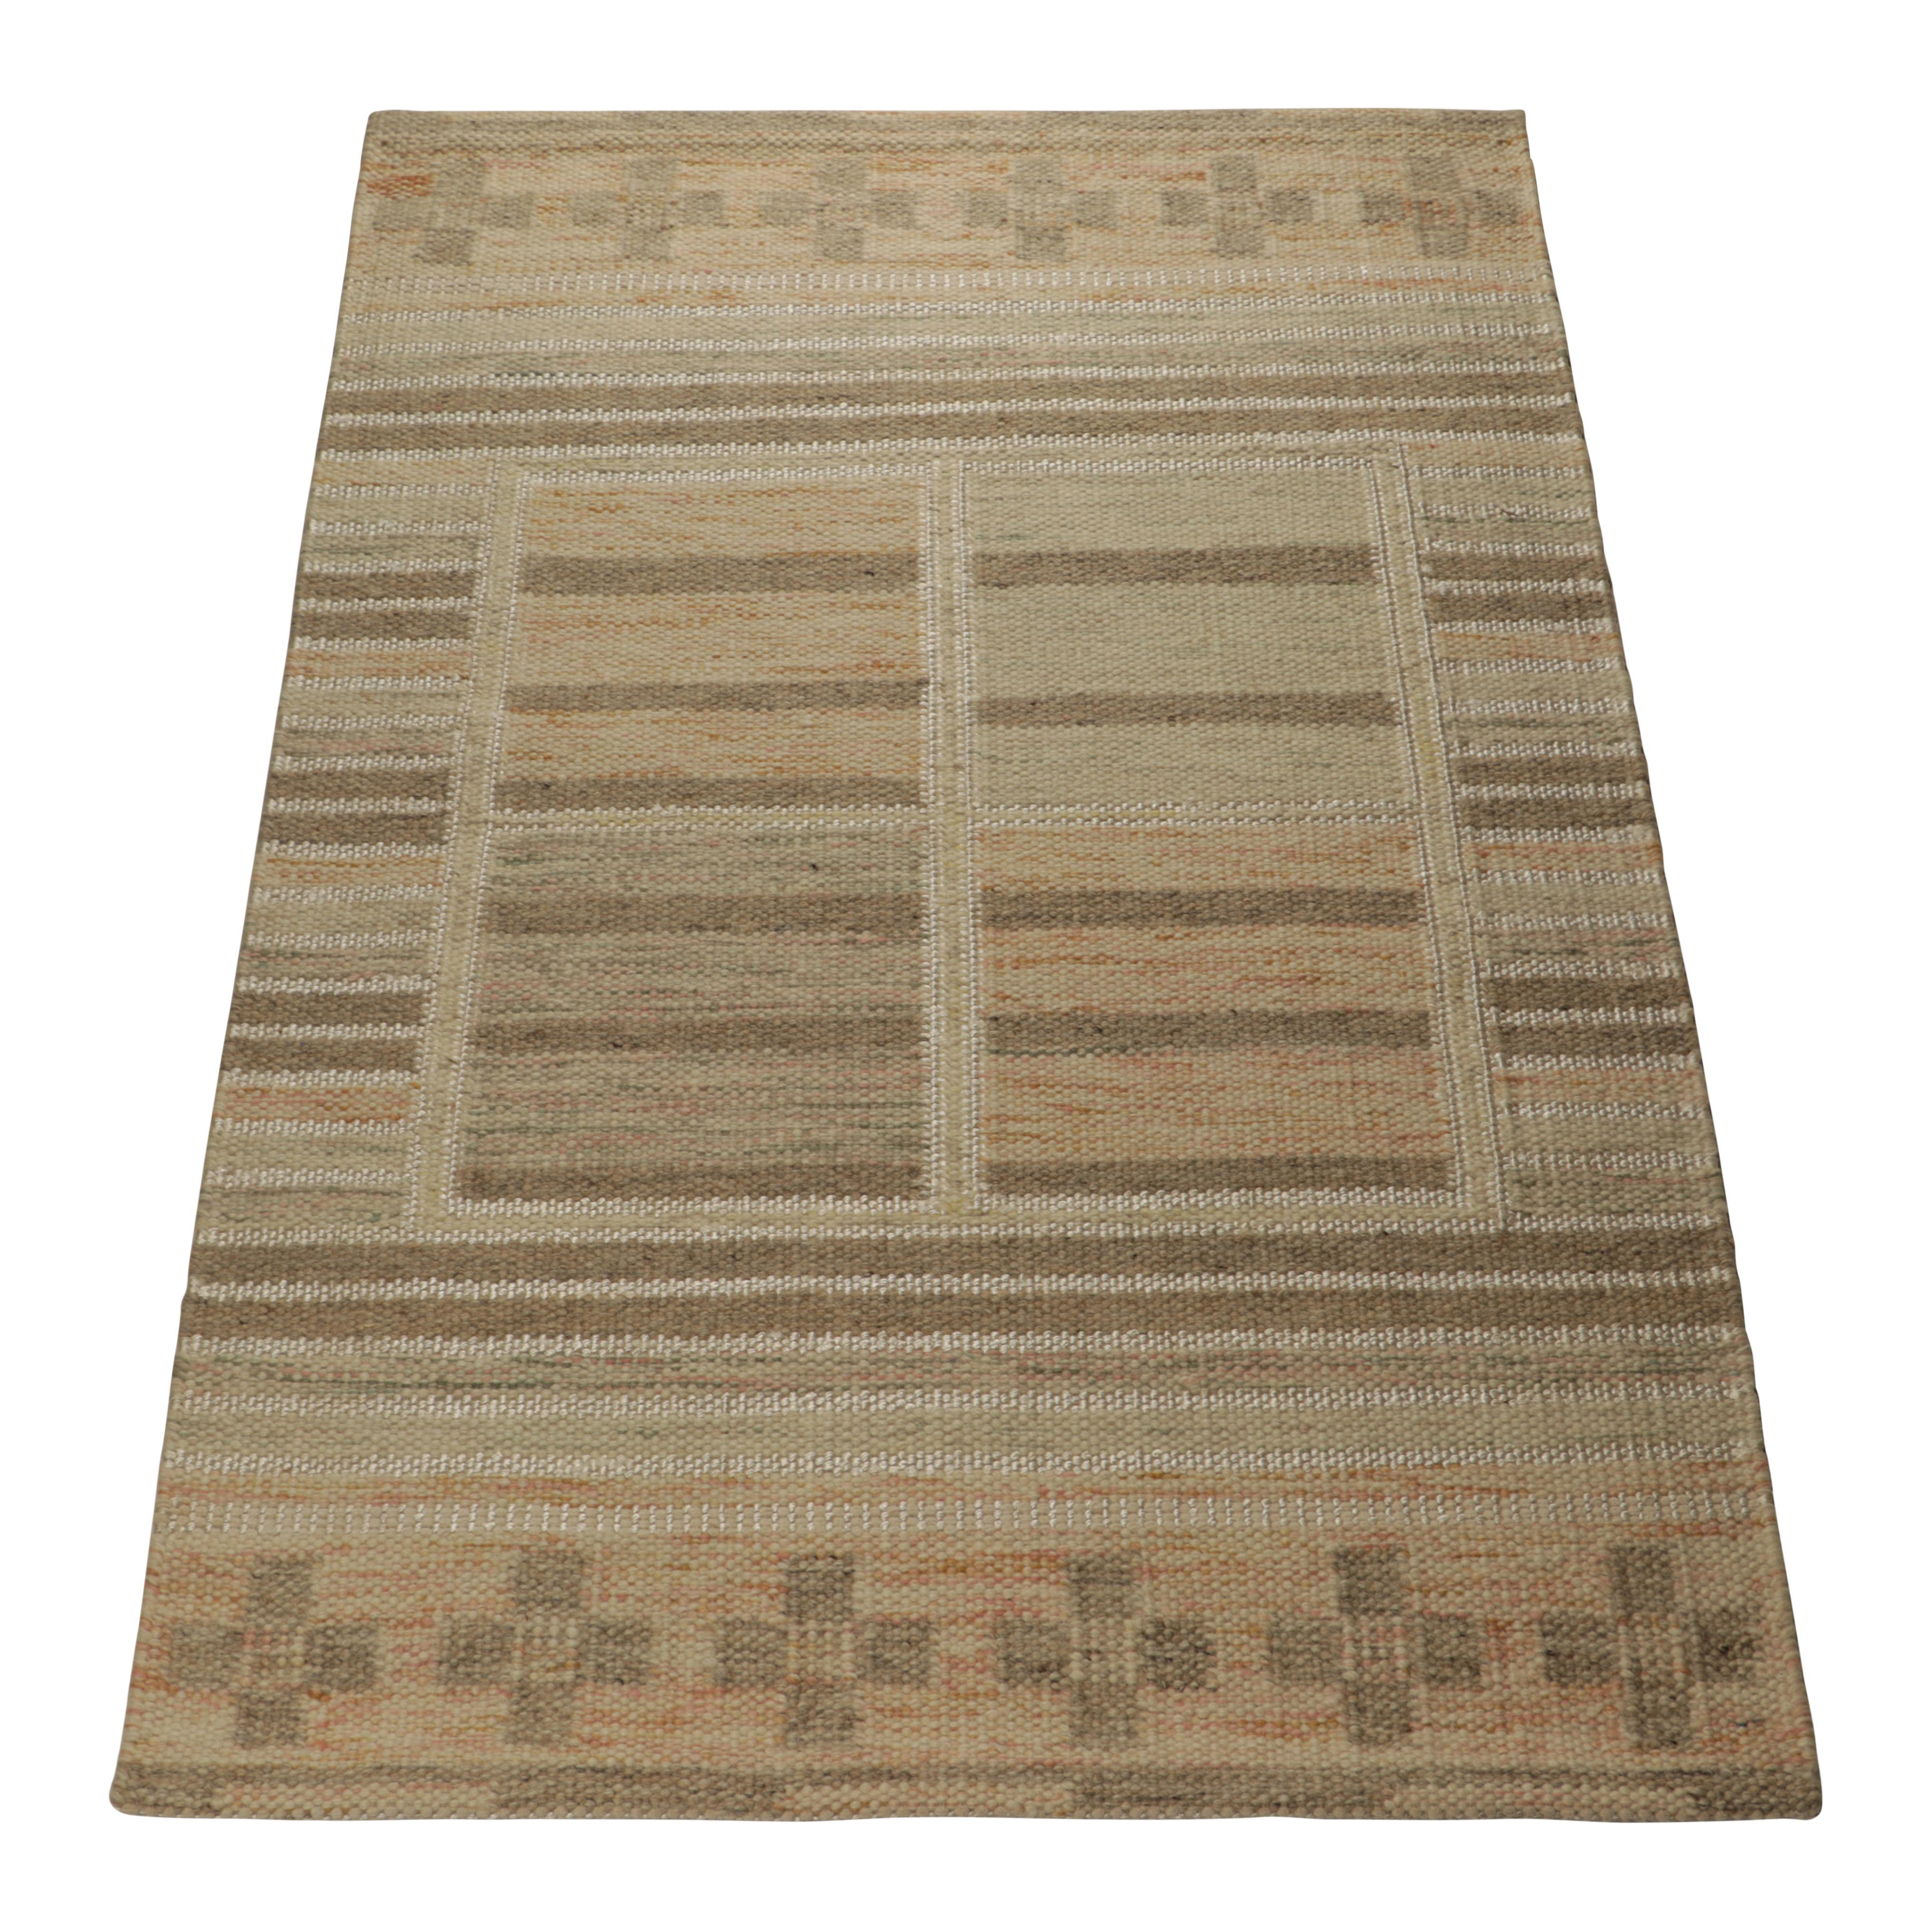 Indian Rug & Kilim’s Scandinavian Style Rug in Beige, with Colorful Geometric Patterns For Sale